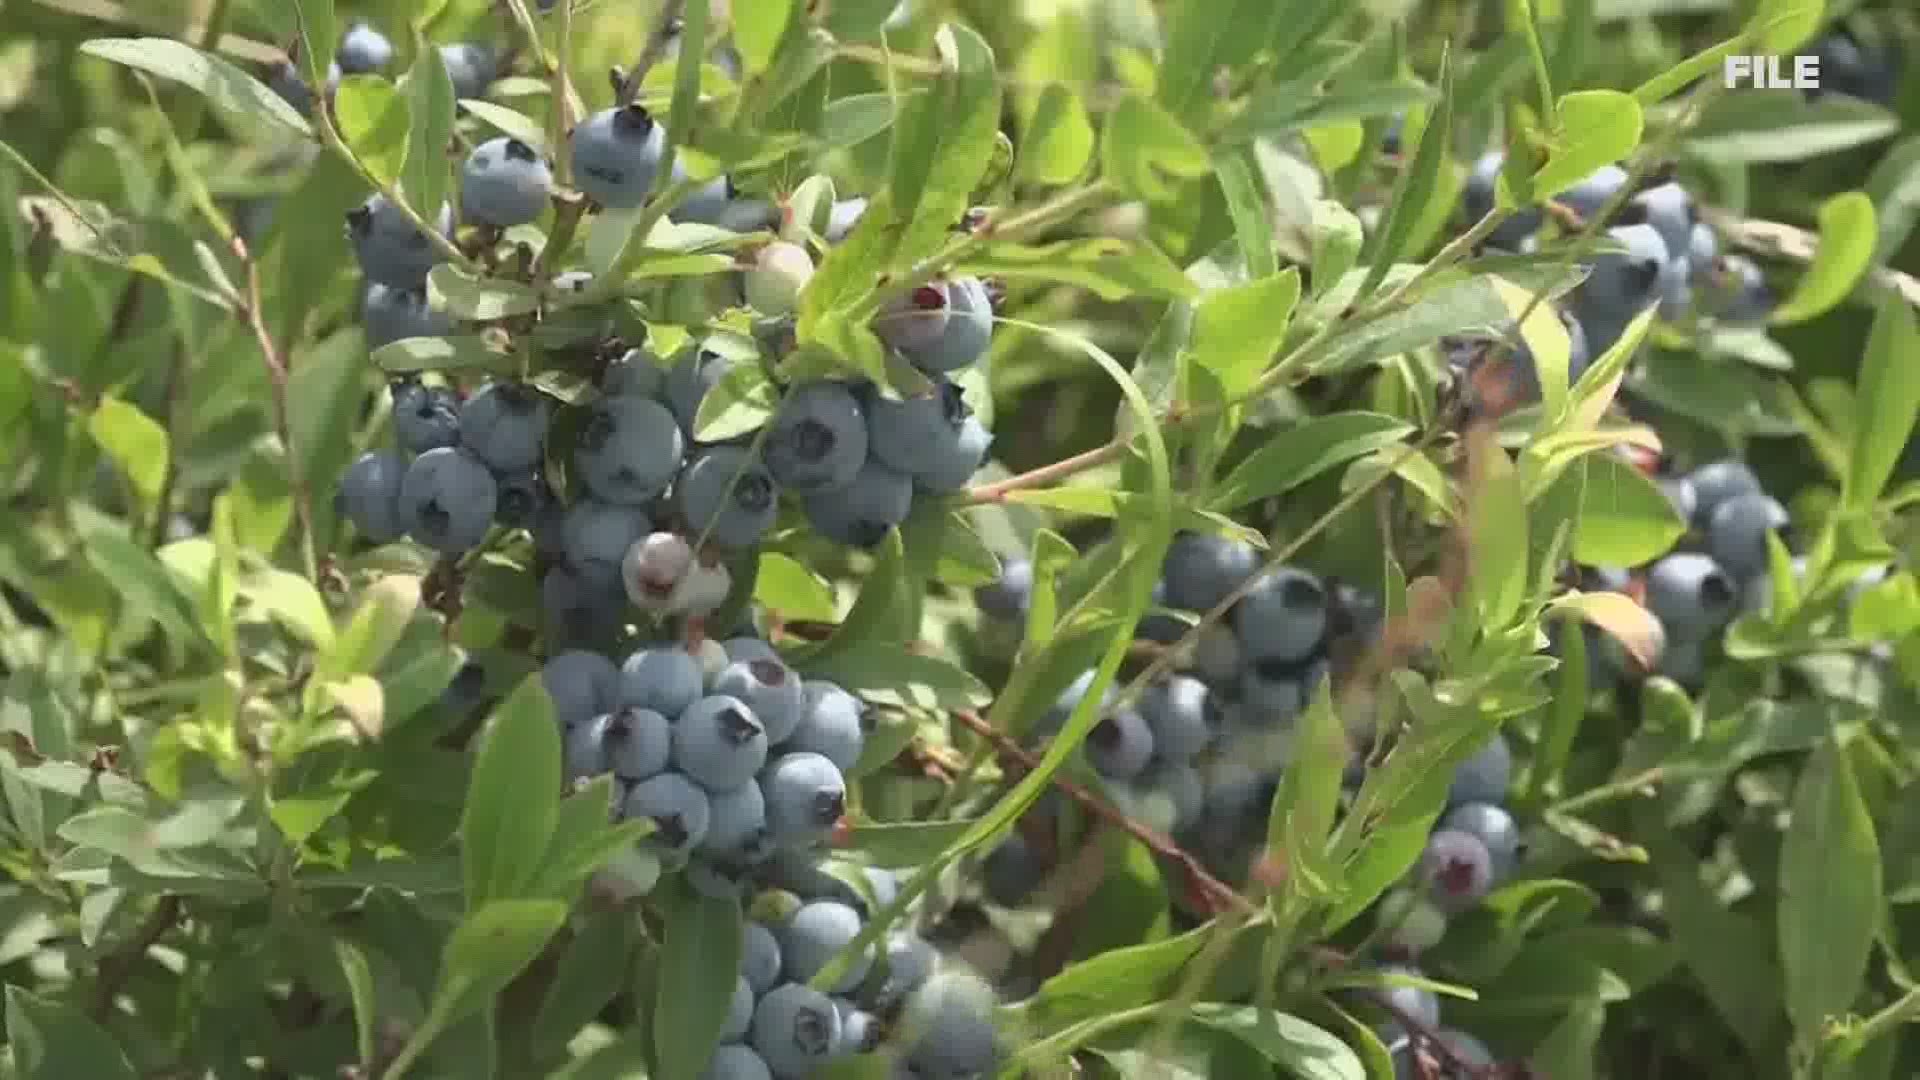 While Maine lowbush blueberries are delicious to eat, a new study shows they may also provide some healing properties.